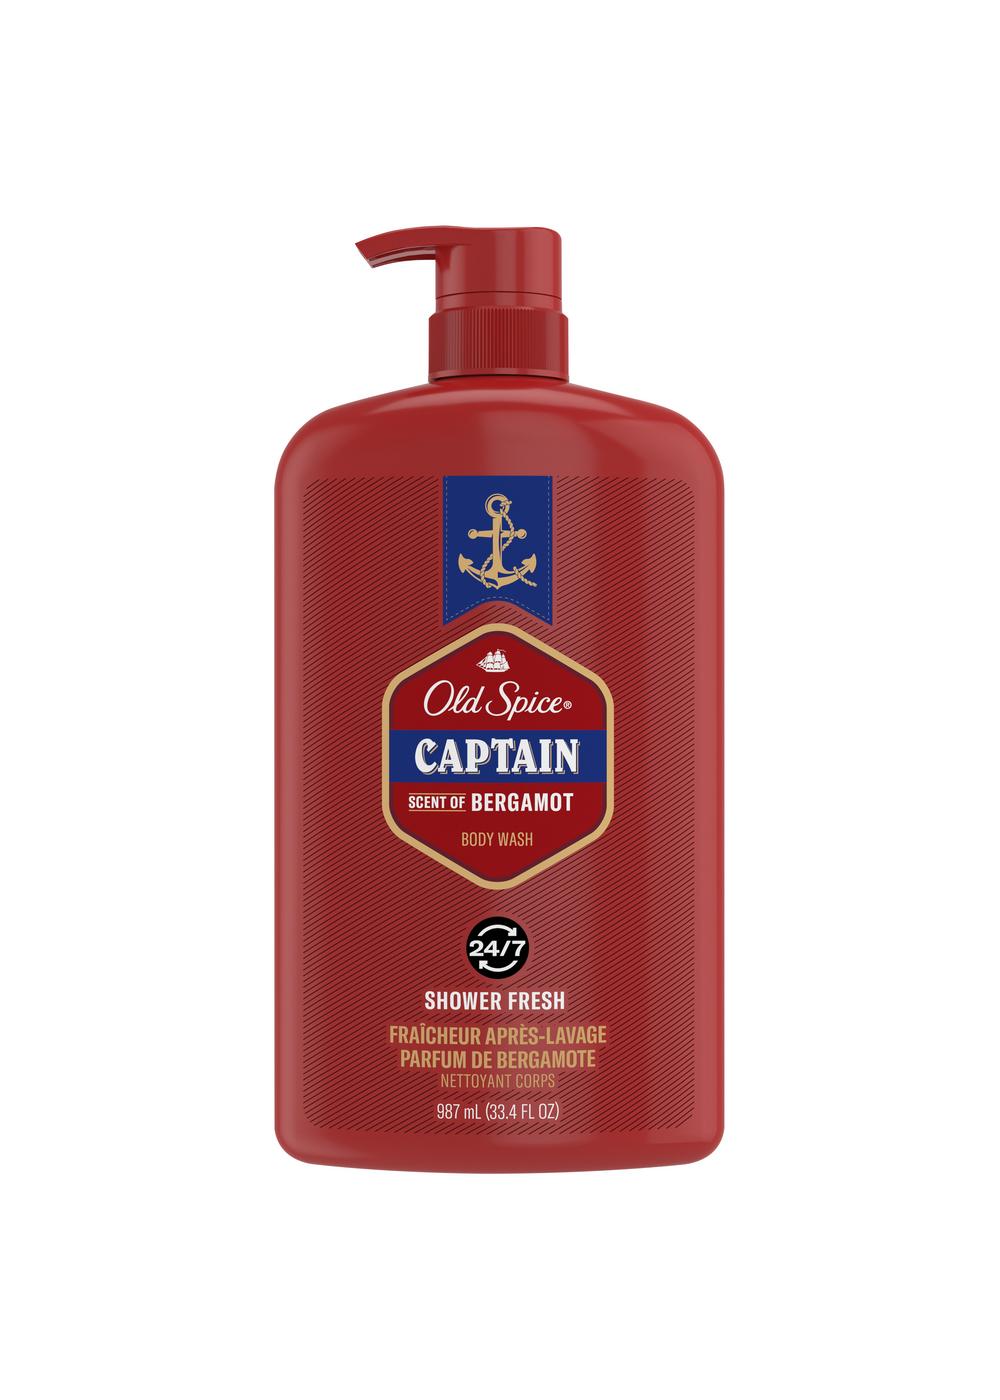 Old Spice Body Wash - Captain; image 1 of 2